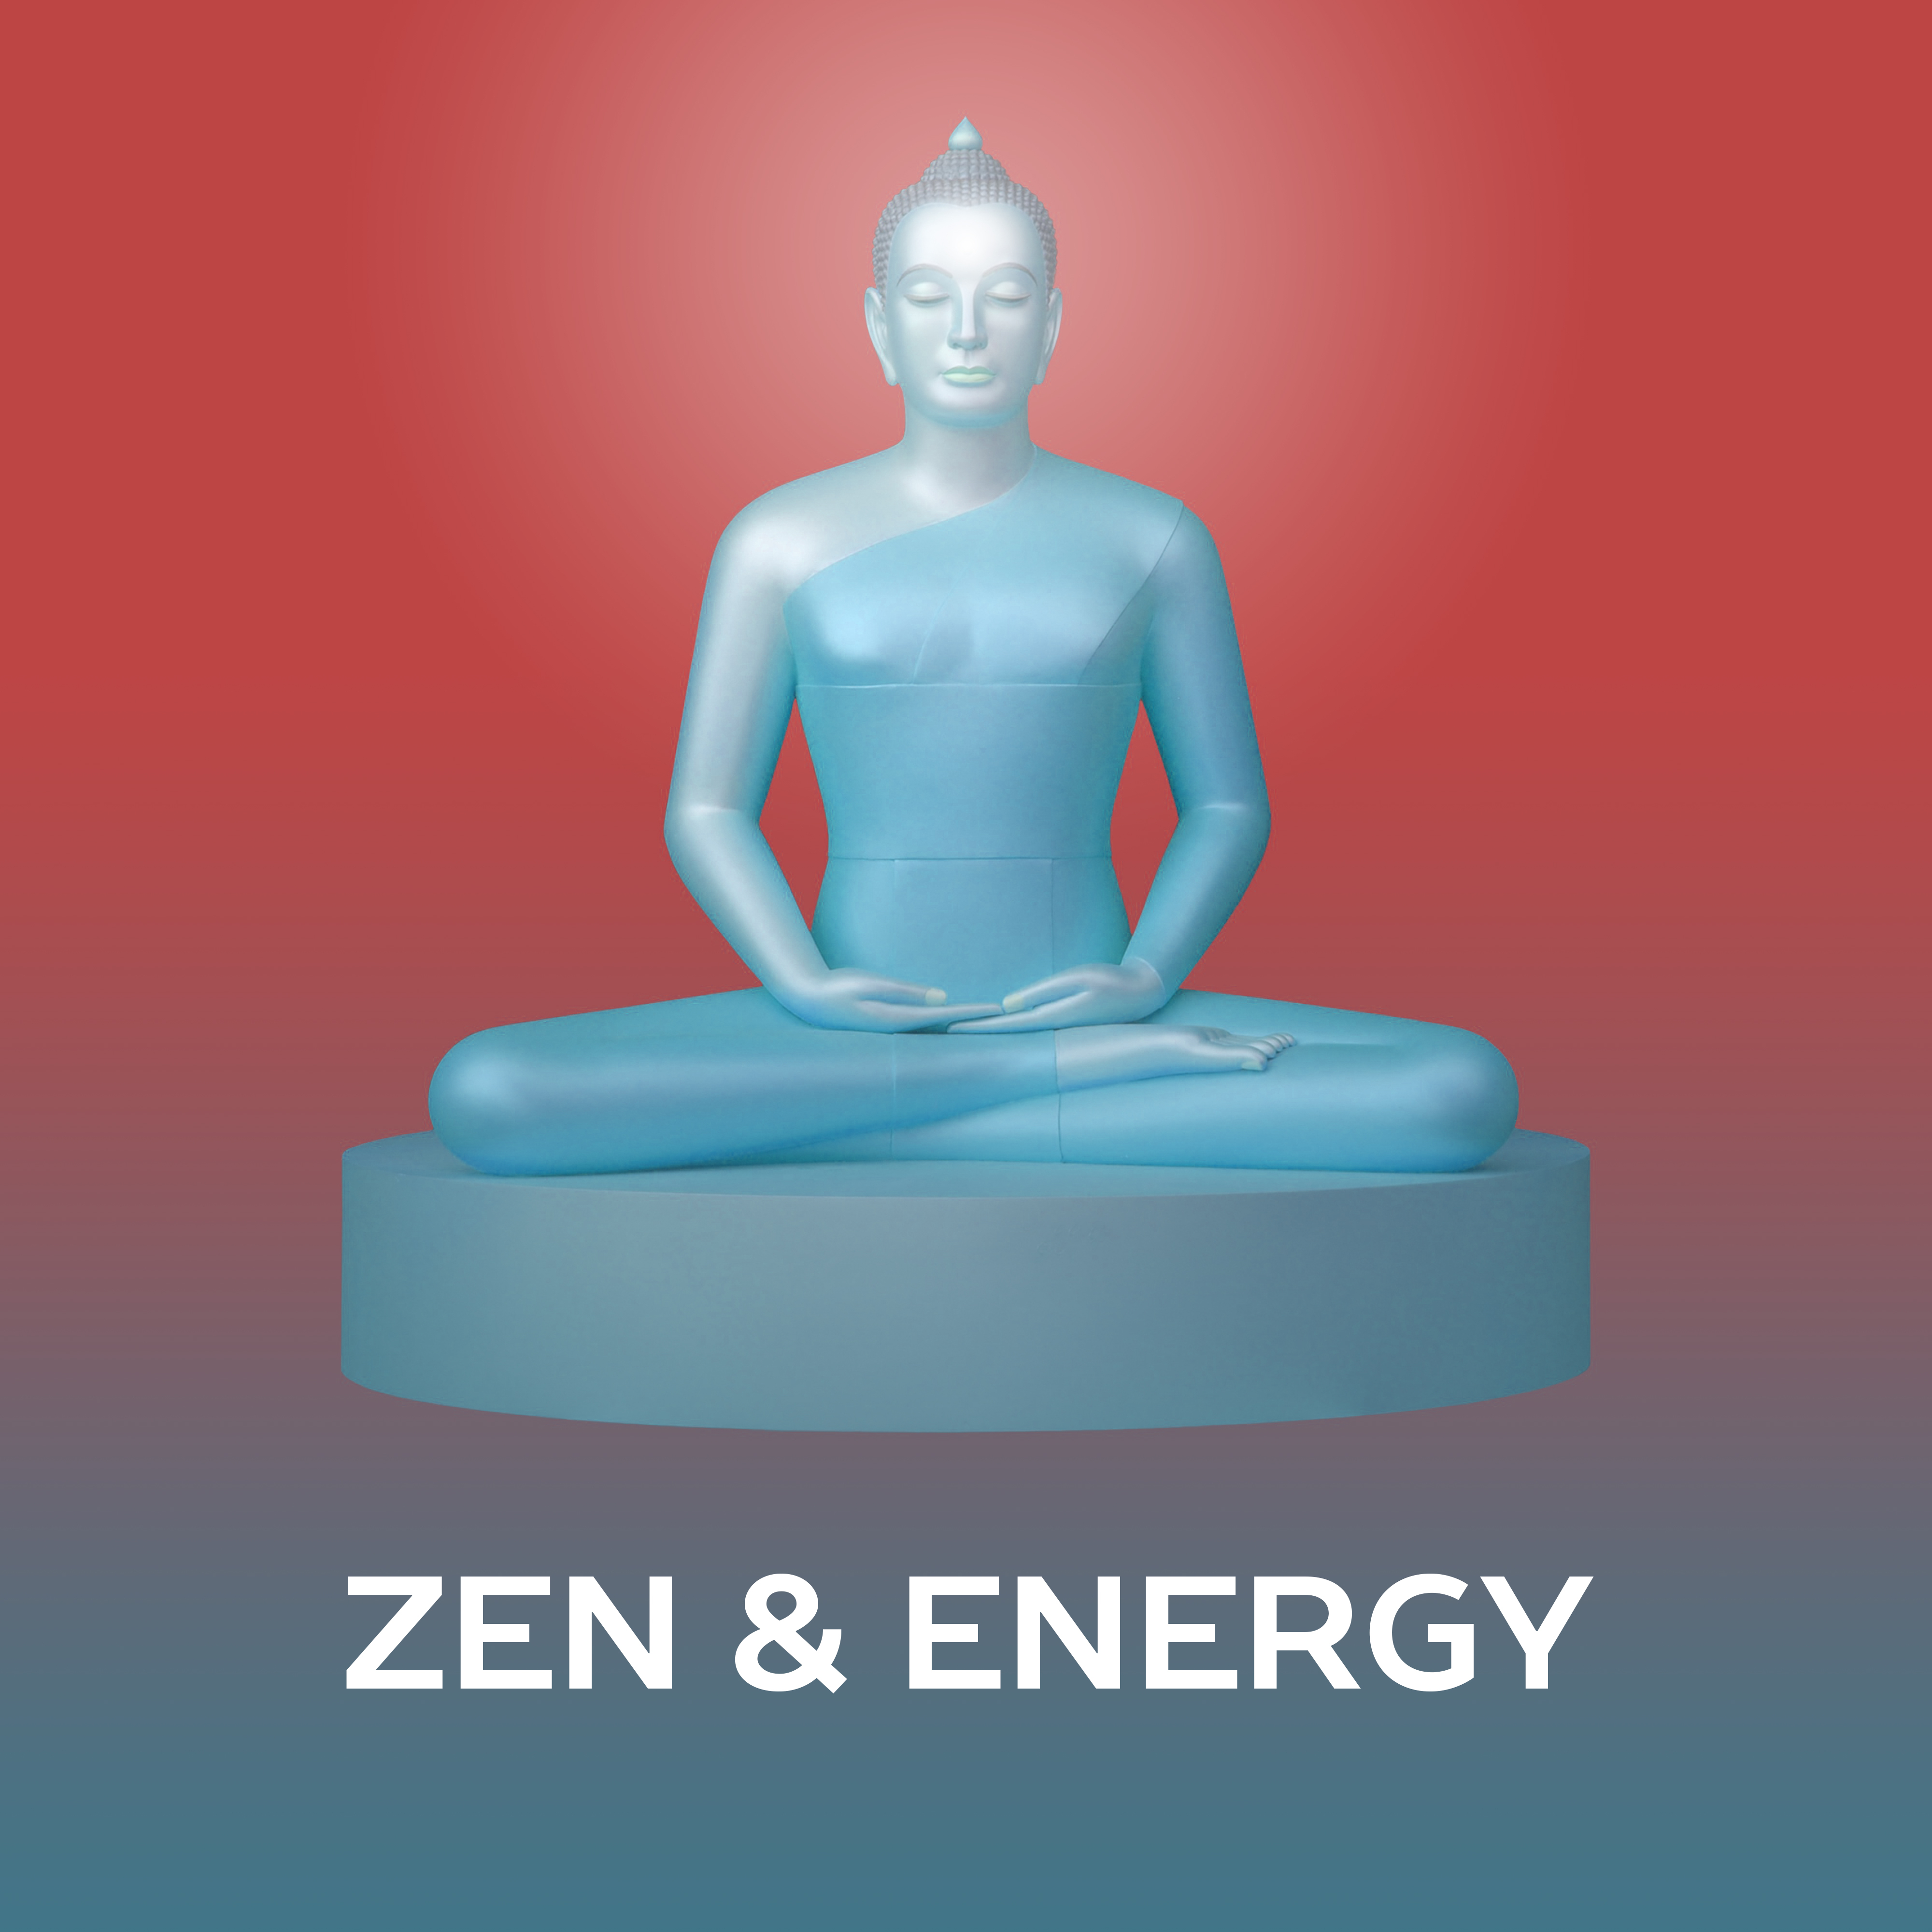 Zen & Energy – Music for Meditation, Training Yoga, Concentration, Harmony, Clear Mind, Nature Sounds for Relaxation